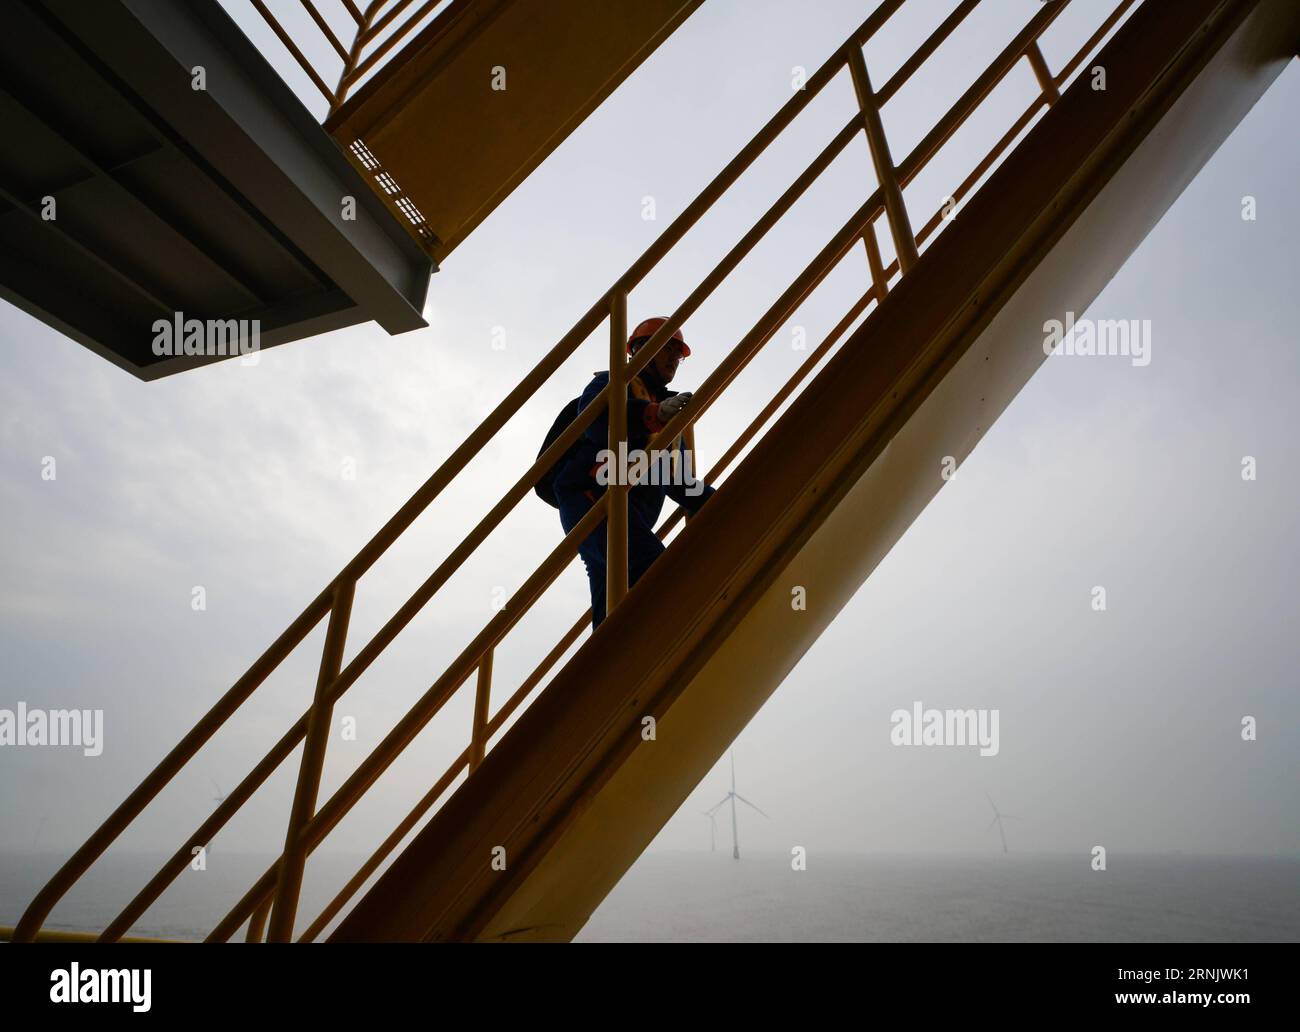 (170216) -- NANTONG, Feb. 16, 2017 -- An engineer checks a booster station in Rudong offshore wind farm of China General Nuclear Power Corporation (CGN) in Rudong County of Nantong City, east China s Jiangsu Province, Feb. 16, 2017. The Rudong offshore windpower project, which is located around 25-35 kilometers offshore Yangkou Port, comprises 38 4MW turbines with a total capacity of 152 MW. It is the first wind farm that require offshore wind turbines be installed at areas of at least 10 kilometers offshore and in water depth of at least 10 meters. ) (zkr) CHINA-JIANGSU-RUDONG-CGN OFFSHORE WI Stock Photo